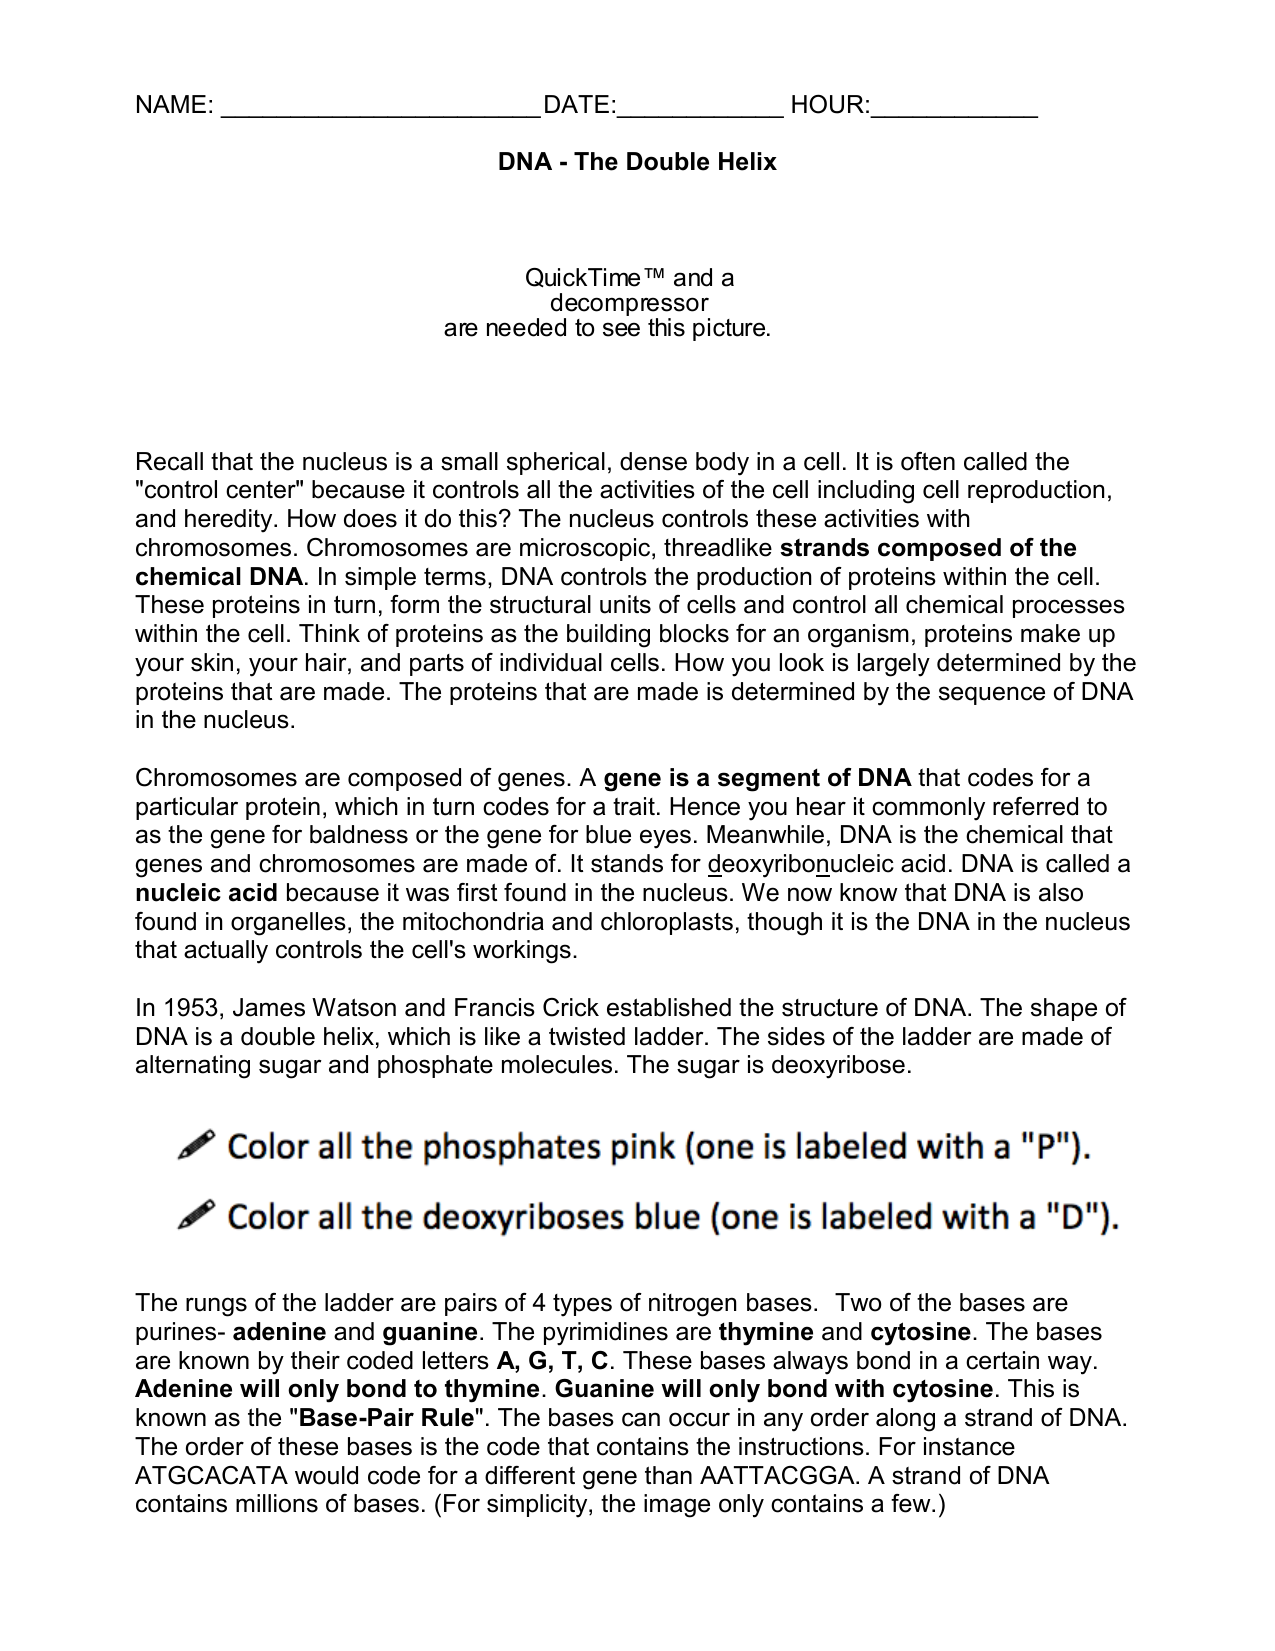 11.11DNA Worksheet In Dna The Double Helix Worksheet